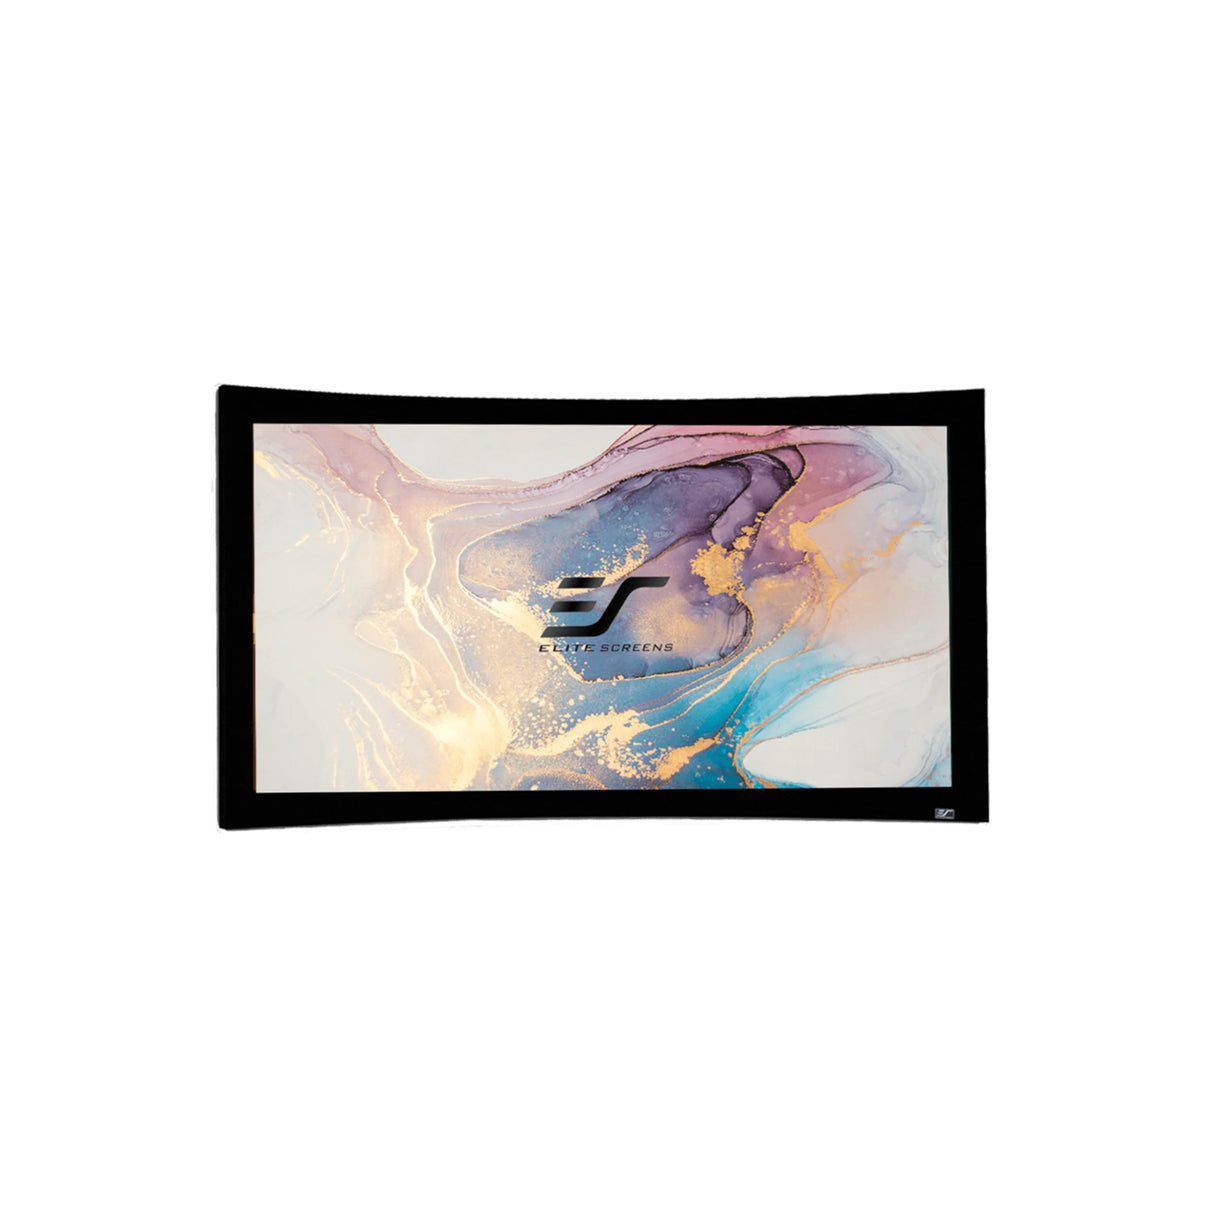 Elite Screens CURVE180WH1 Lunette Series - 180 Inches CineWhite Curve Fixed Frame Projection Screen